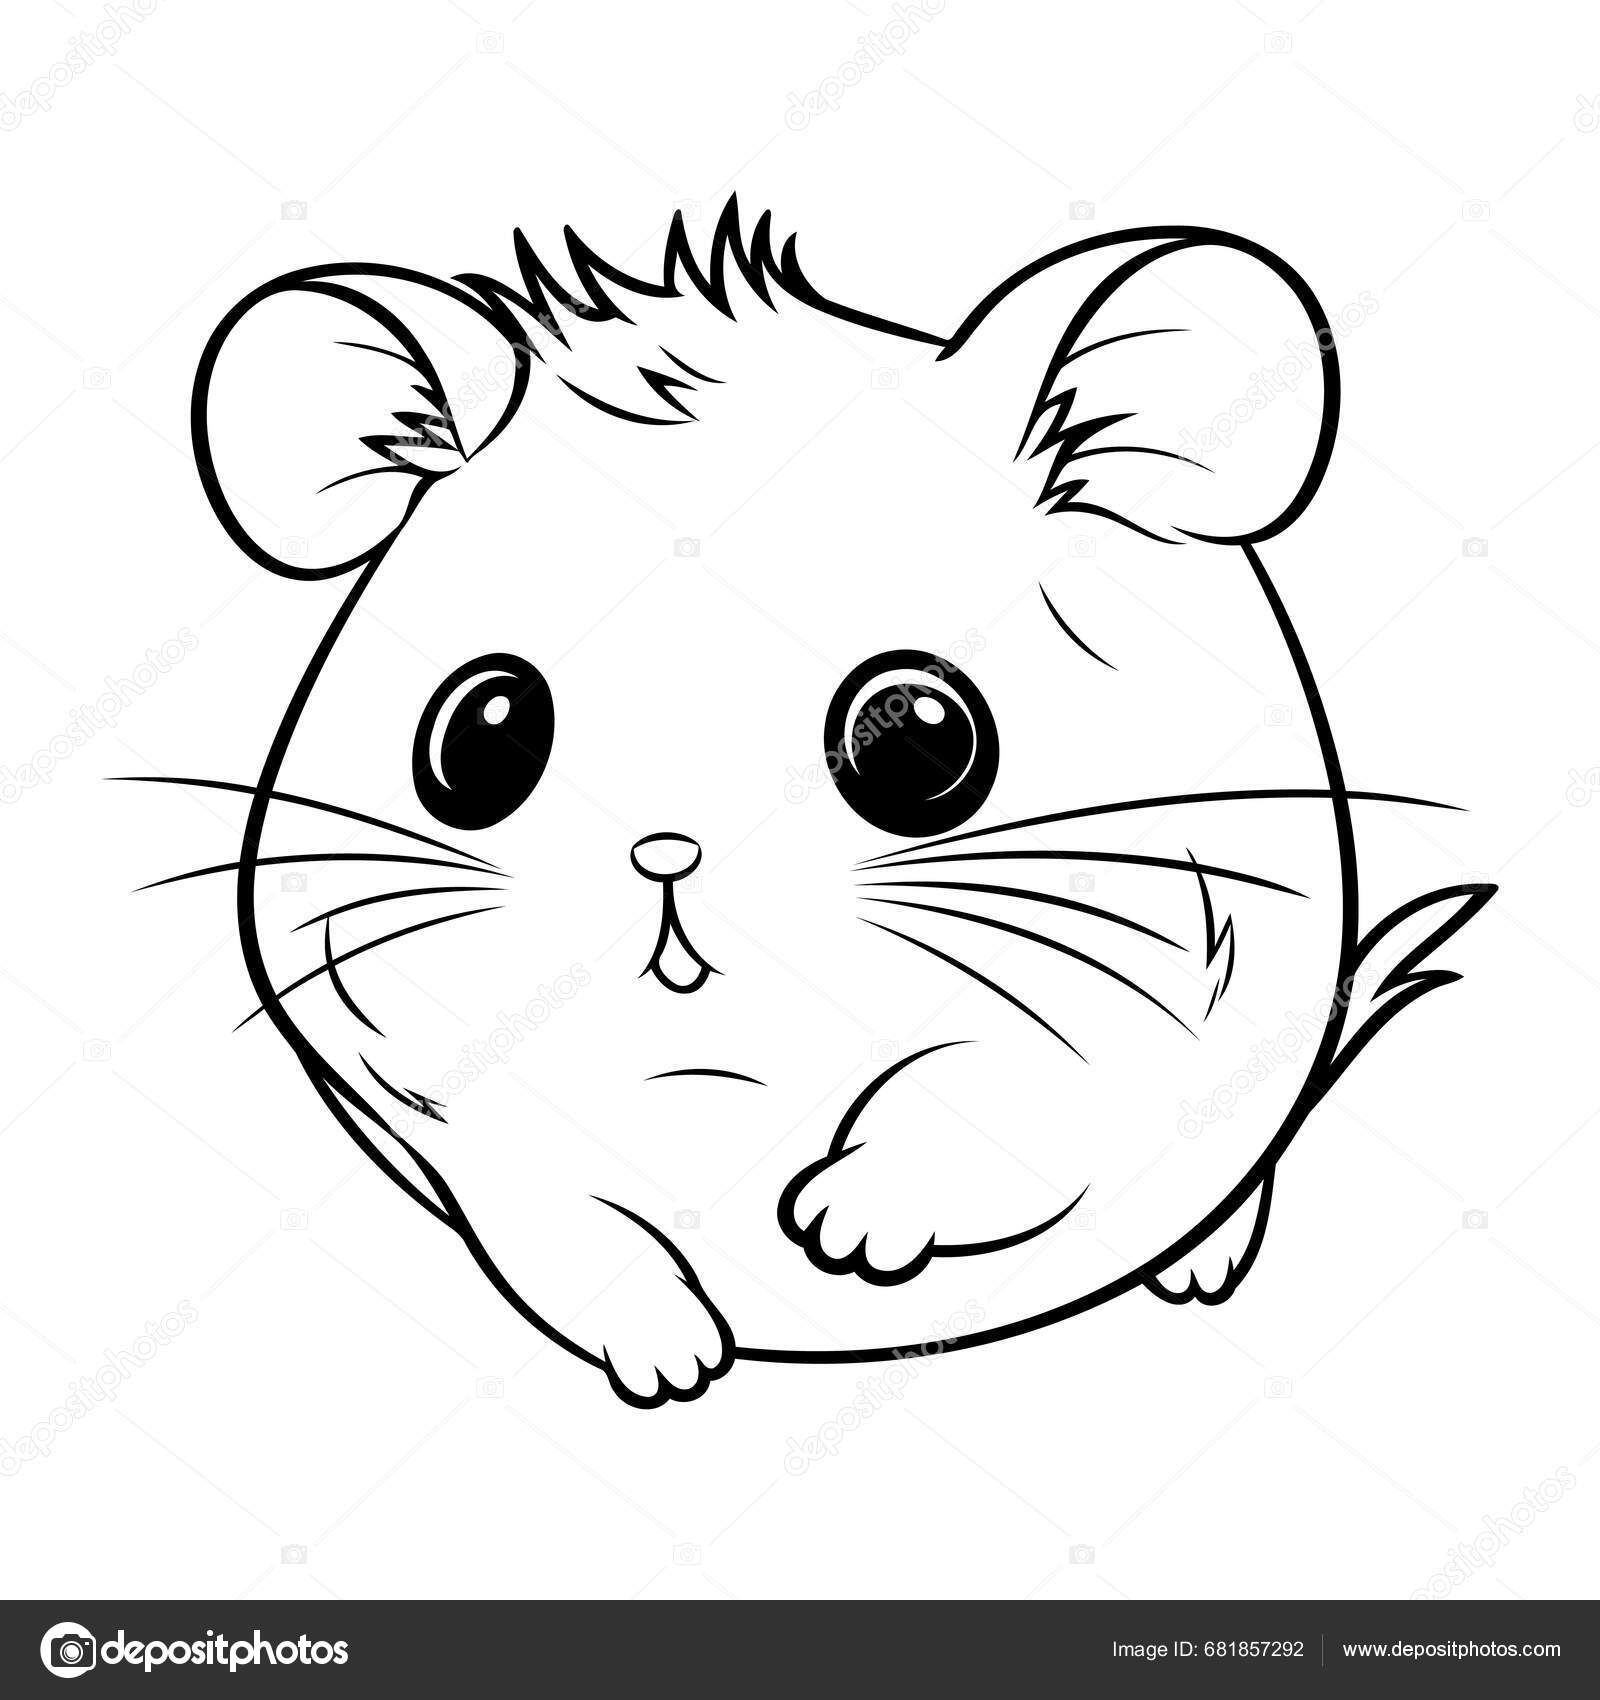 Hamster coloring book adults children vector illustration stock vector by ibrandify